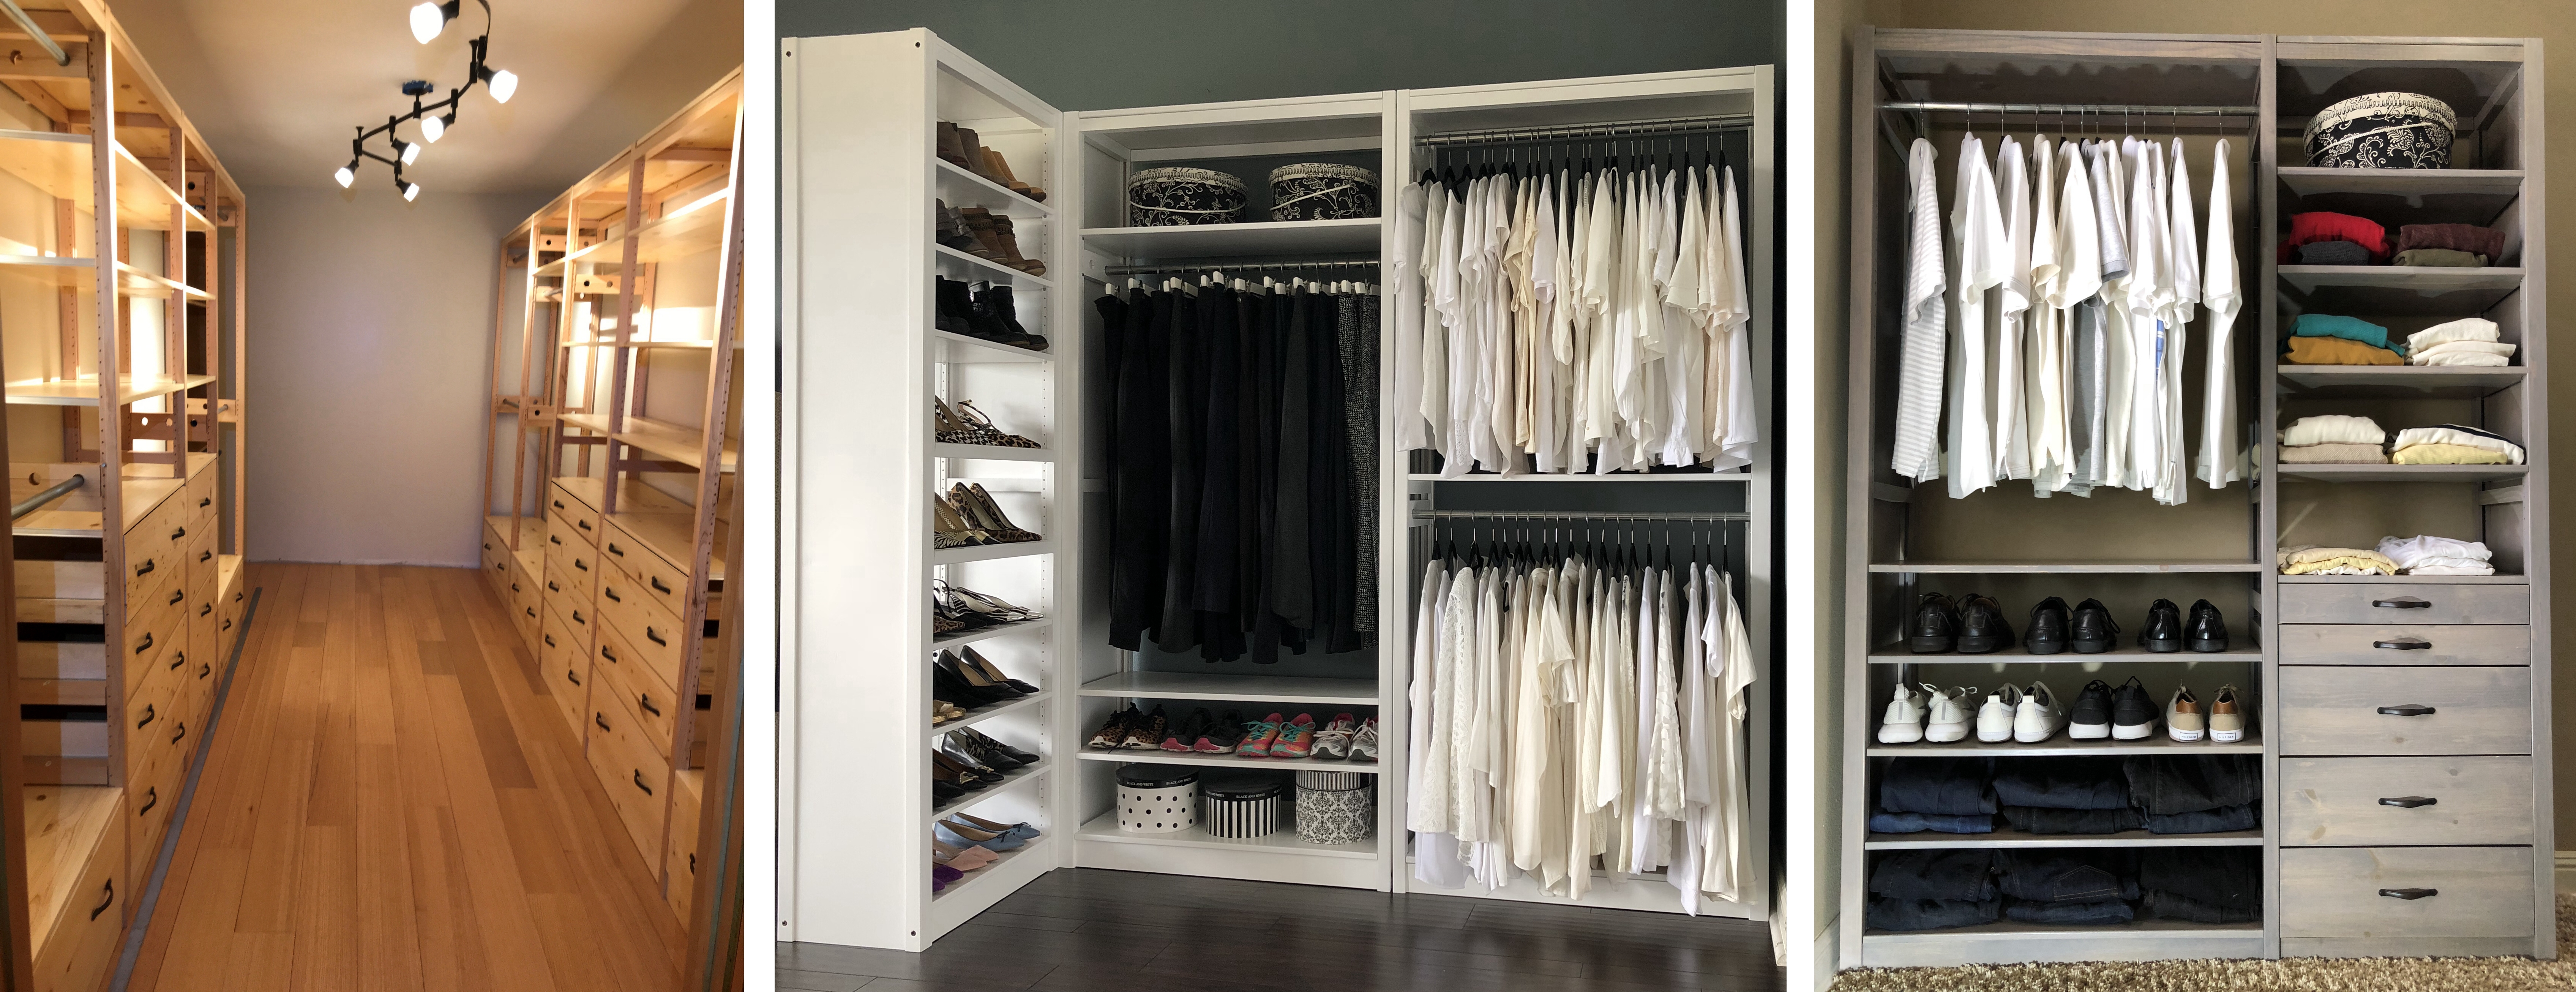 Solid Wood Closets 3 images